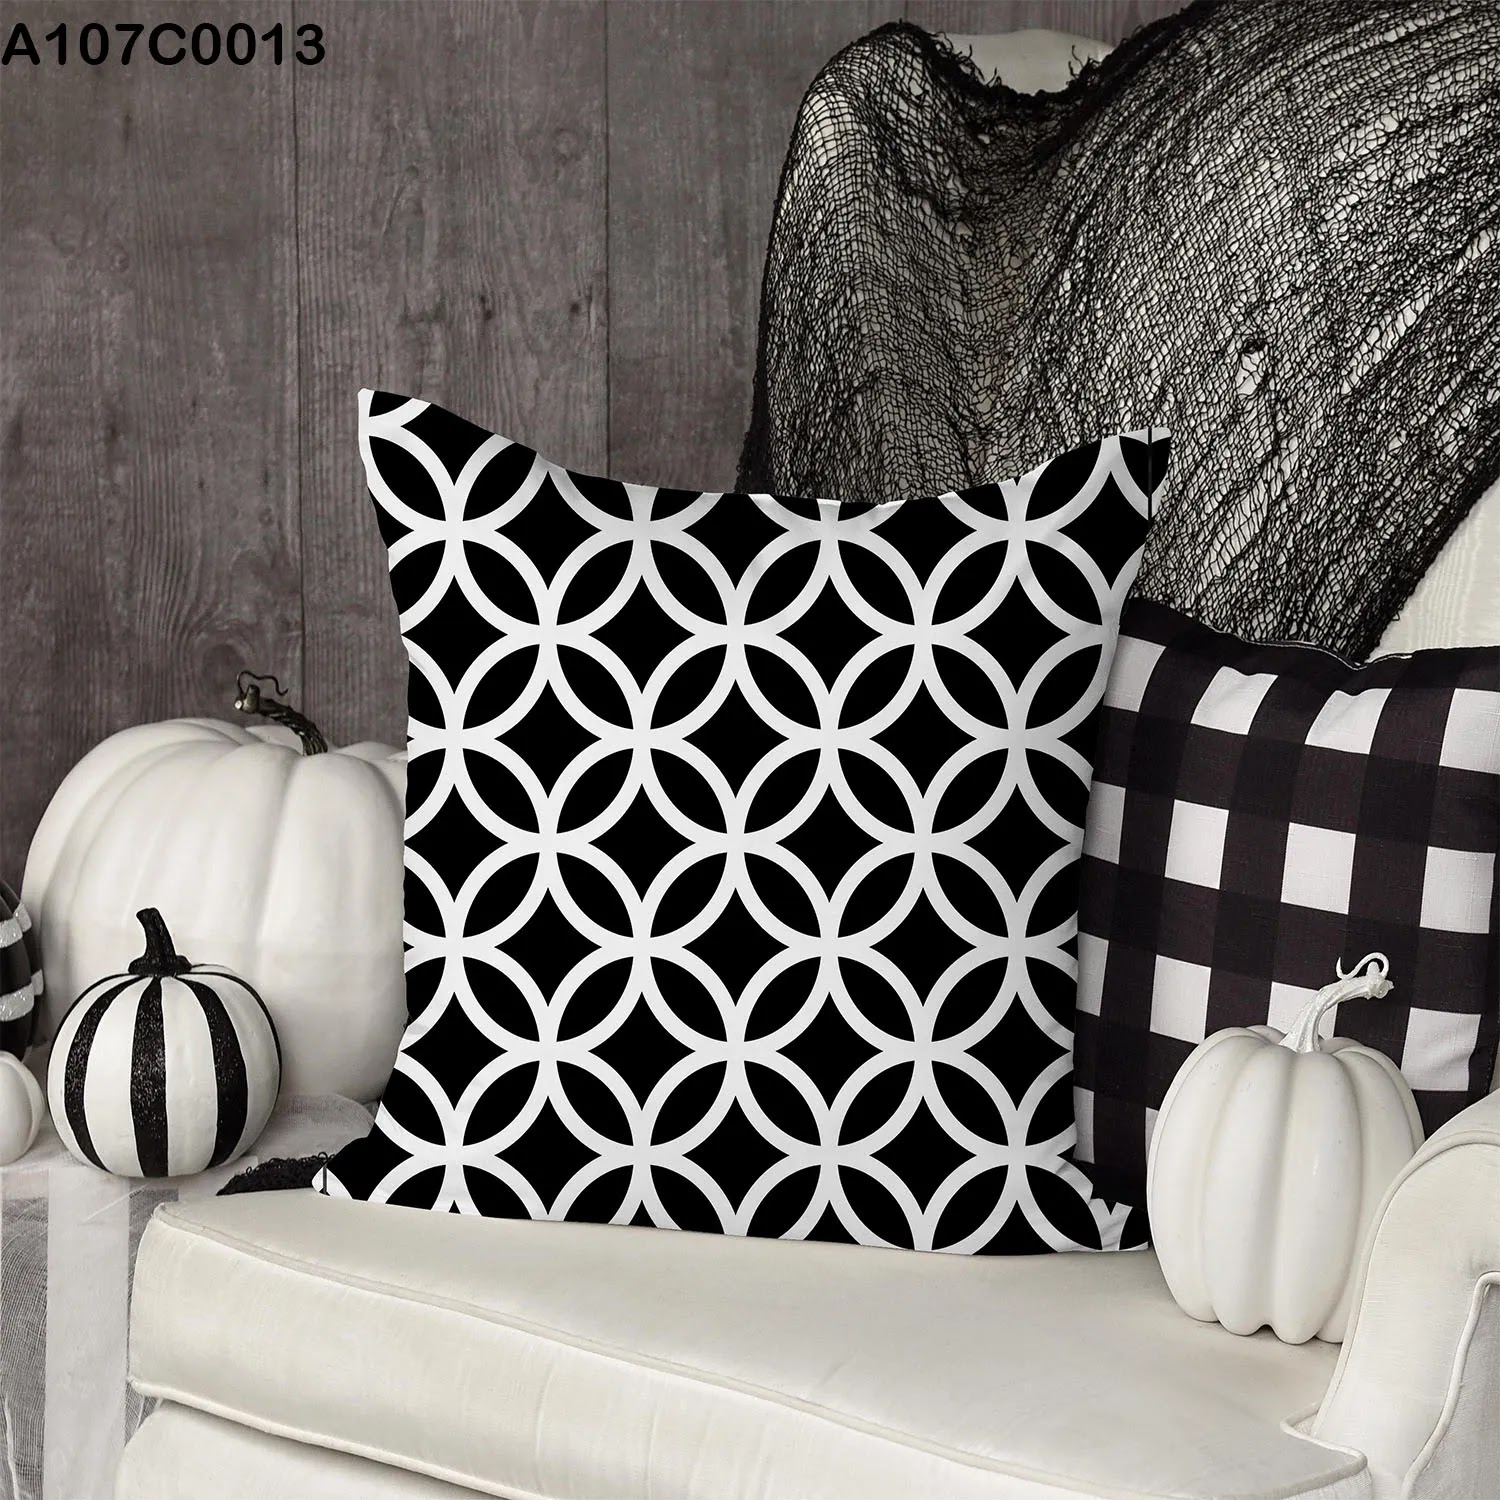 White and black pillow case with circles